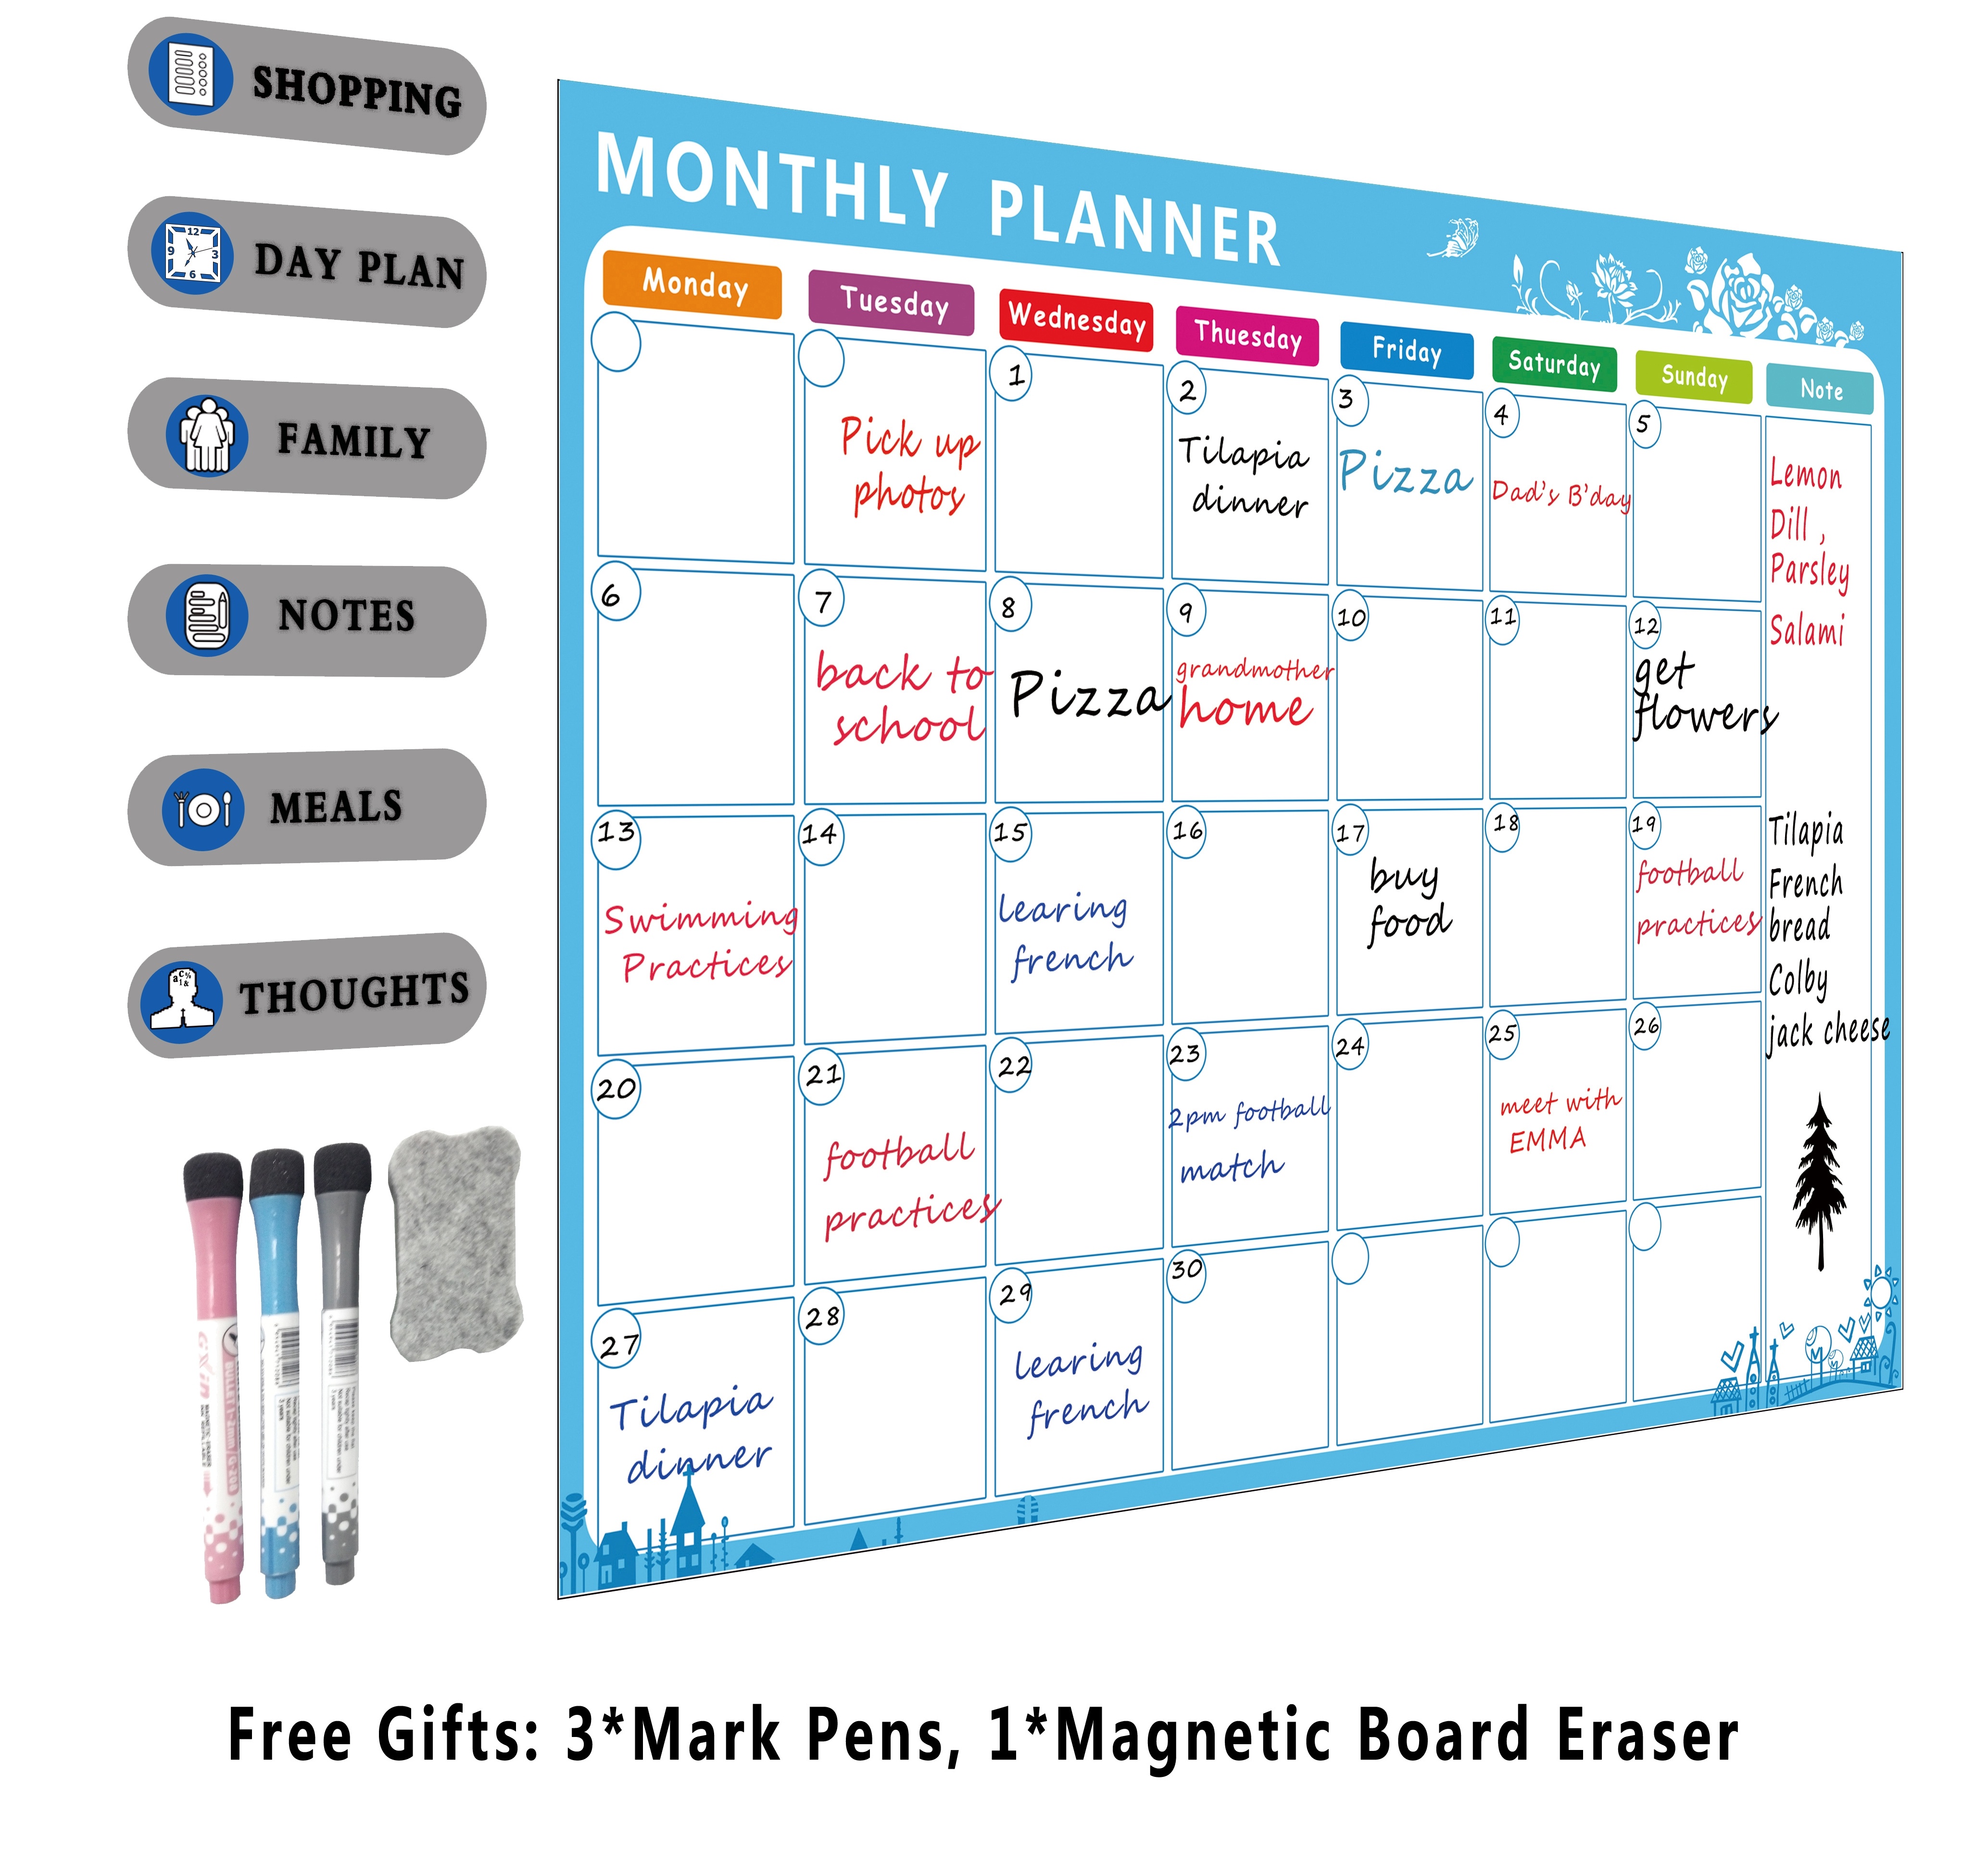 to-do List Office or School Chores Smart Planners Rigid Multi-Purpose Magnetic Wall Hanging Dry Erase Message Board & Organizer with Marker Pink/White Reminders Planner for Home